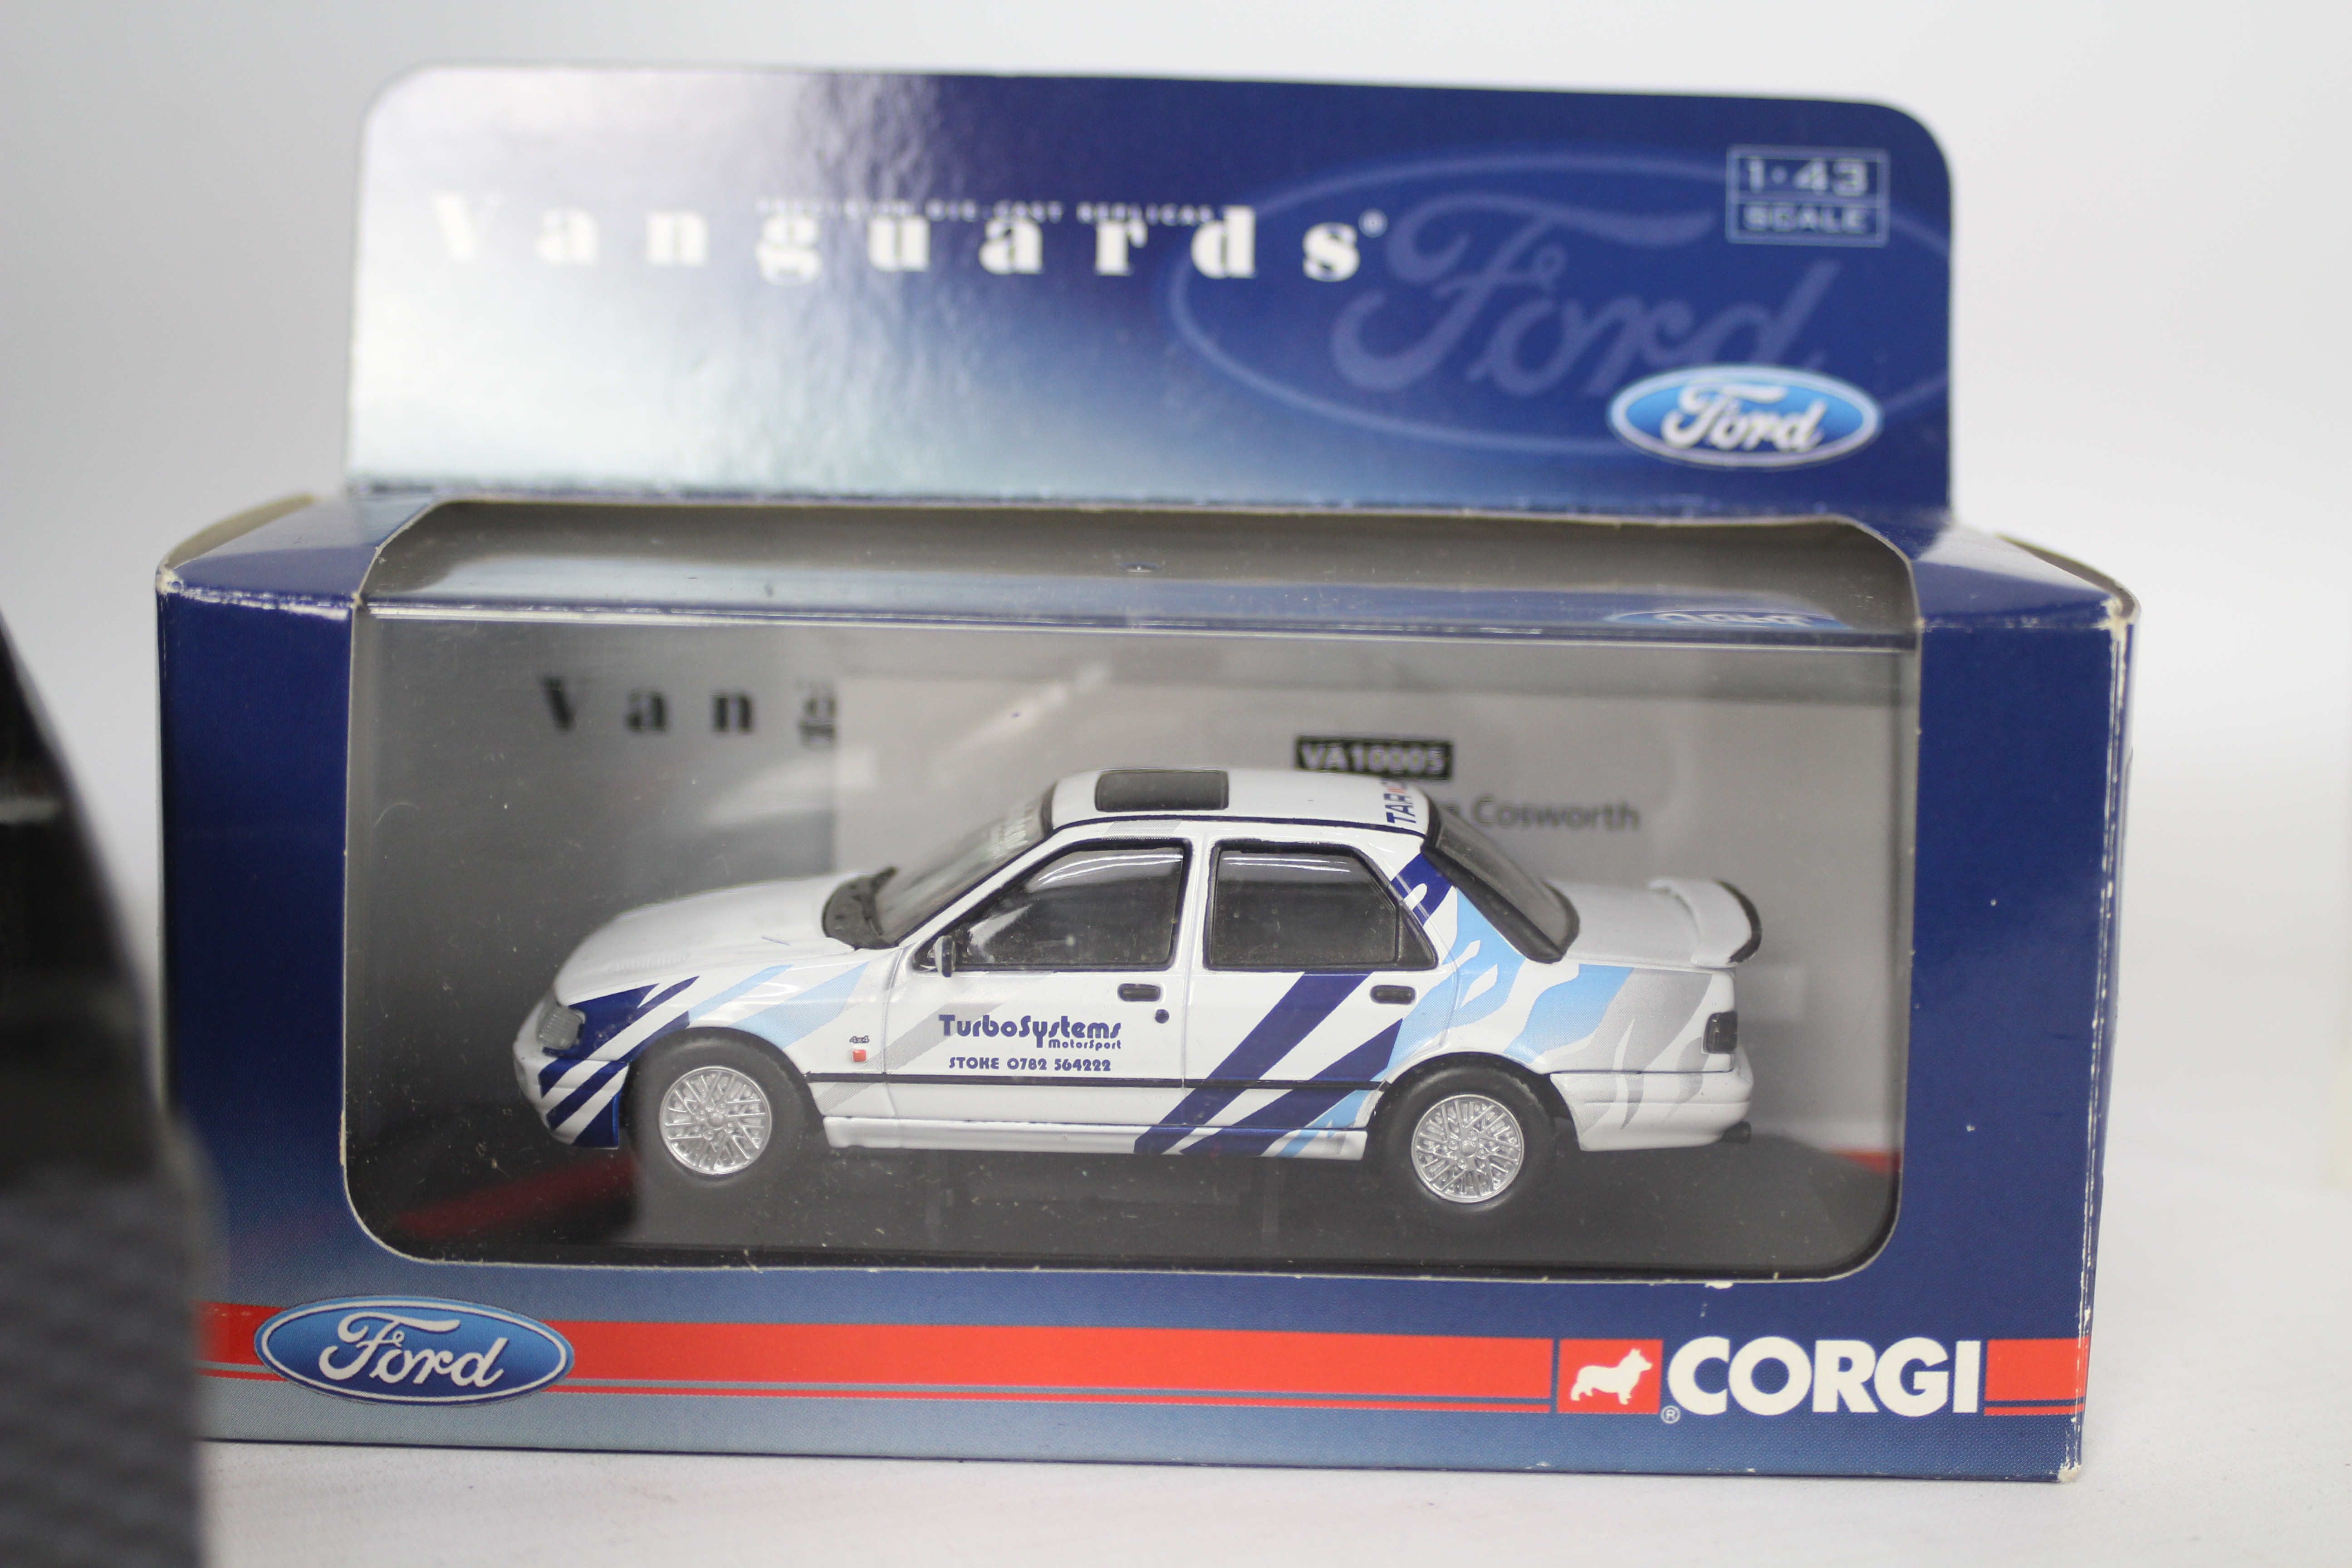 Corgi - 3 x boxed limited edition Ford Sierra Sapphire Cosworth models in 1:43 scale, - Image 3 of 4